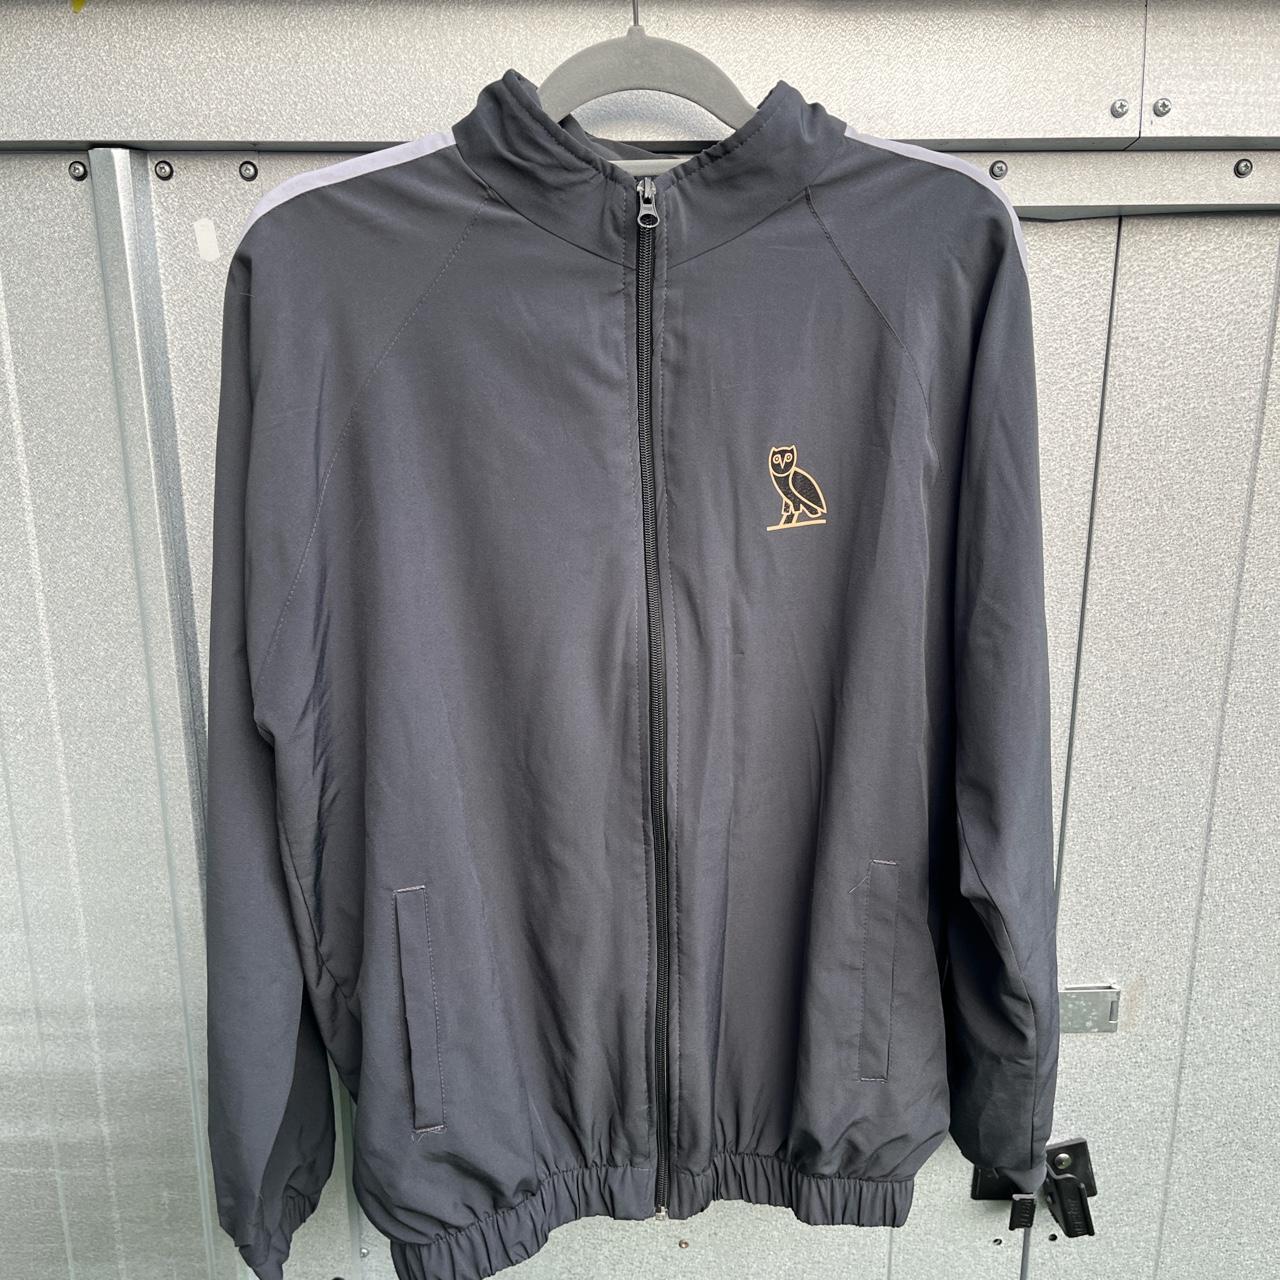 OVO tracksuit brand new excellent cond seen in the pics - Depop